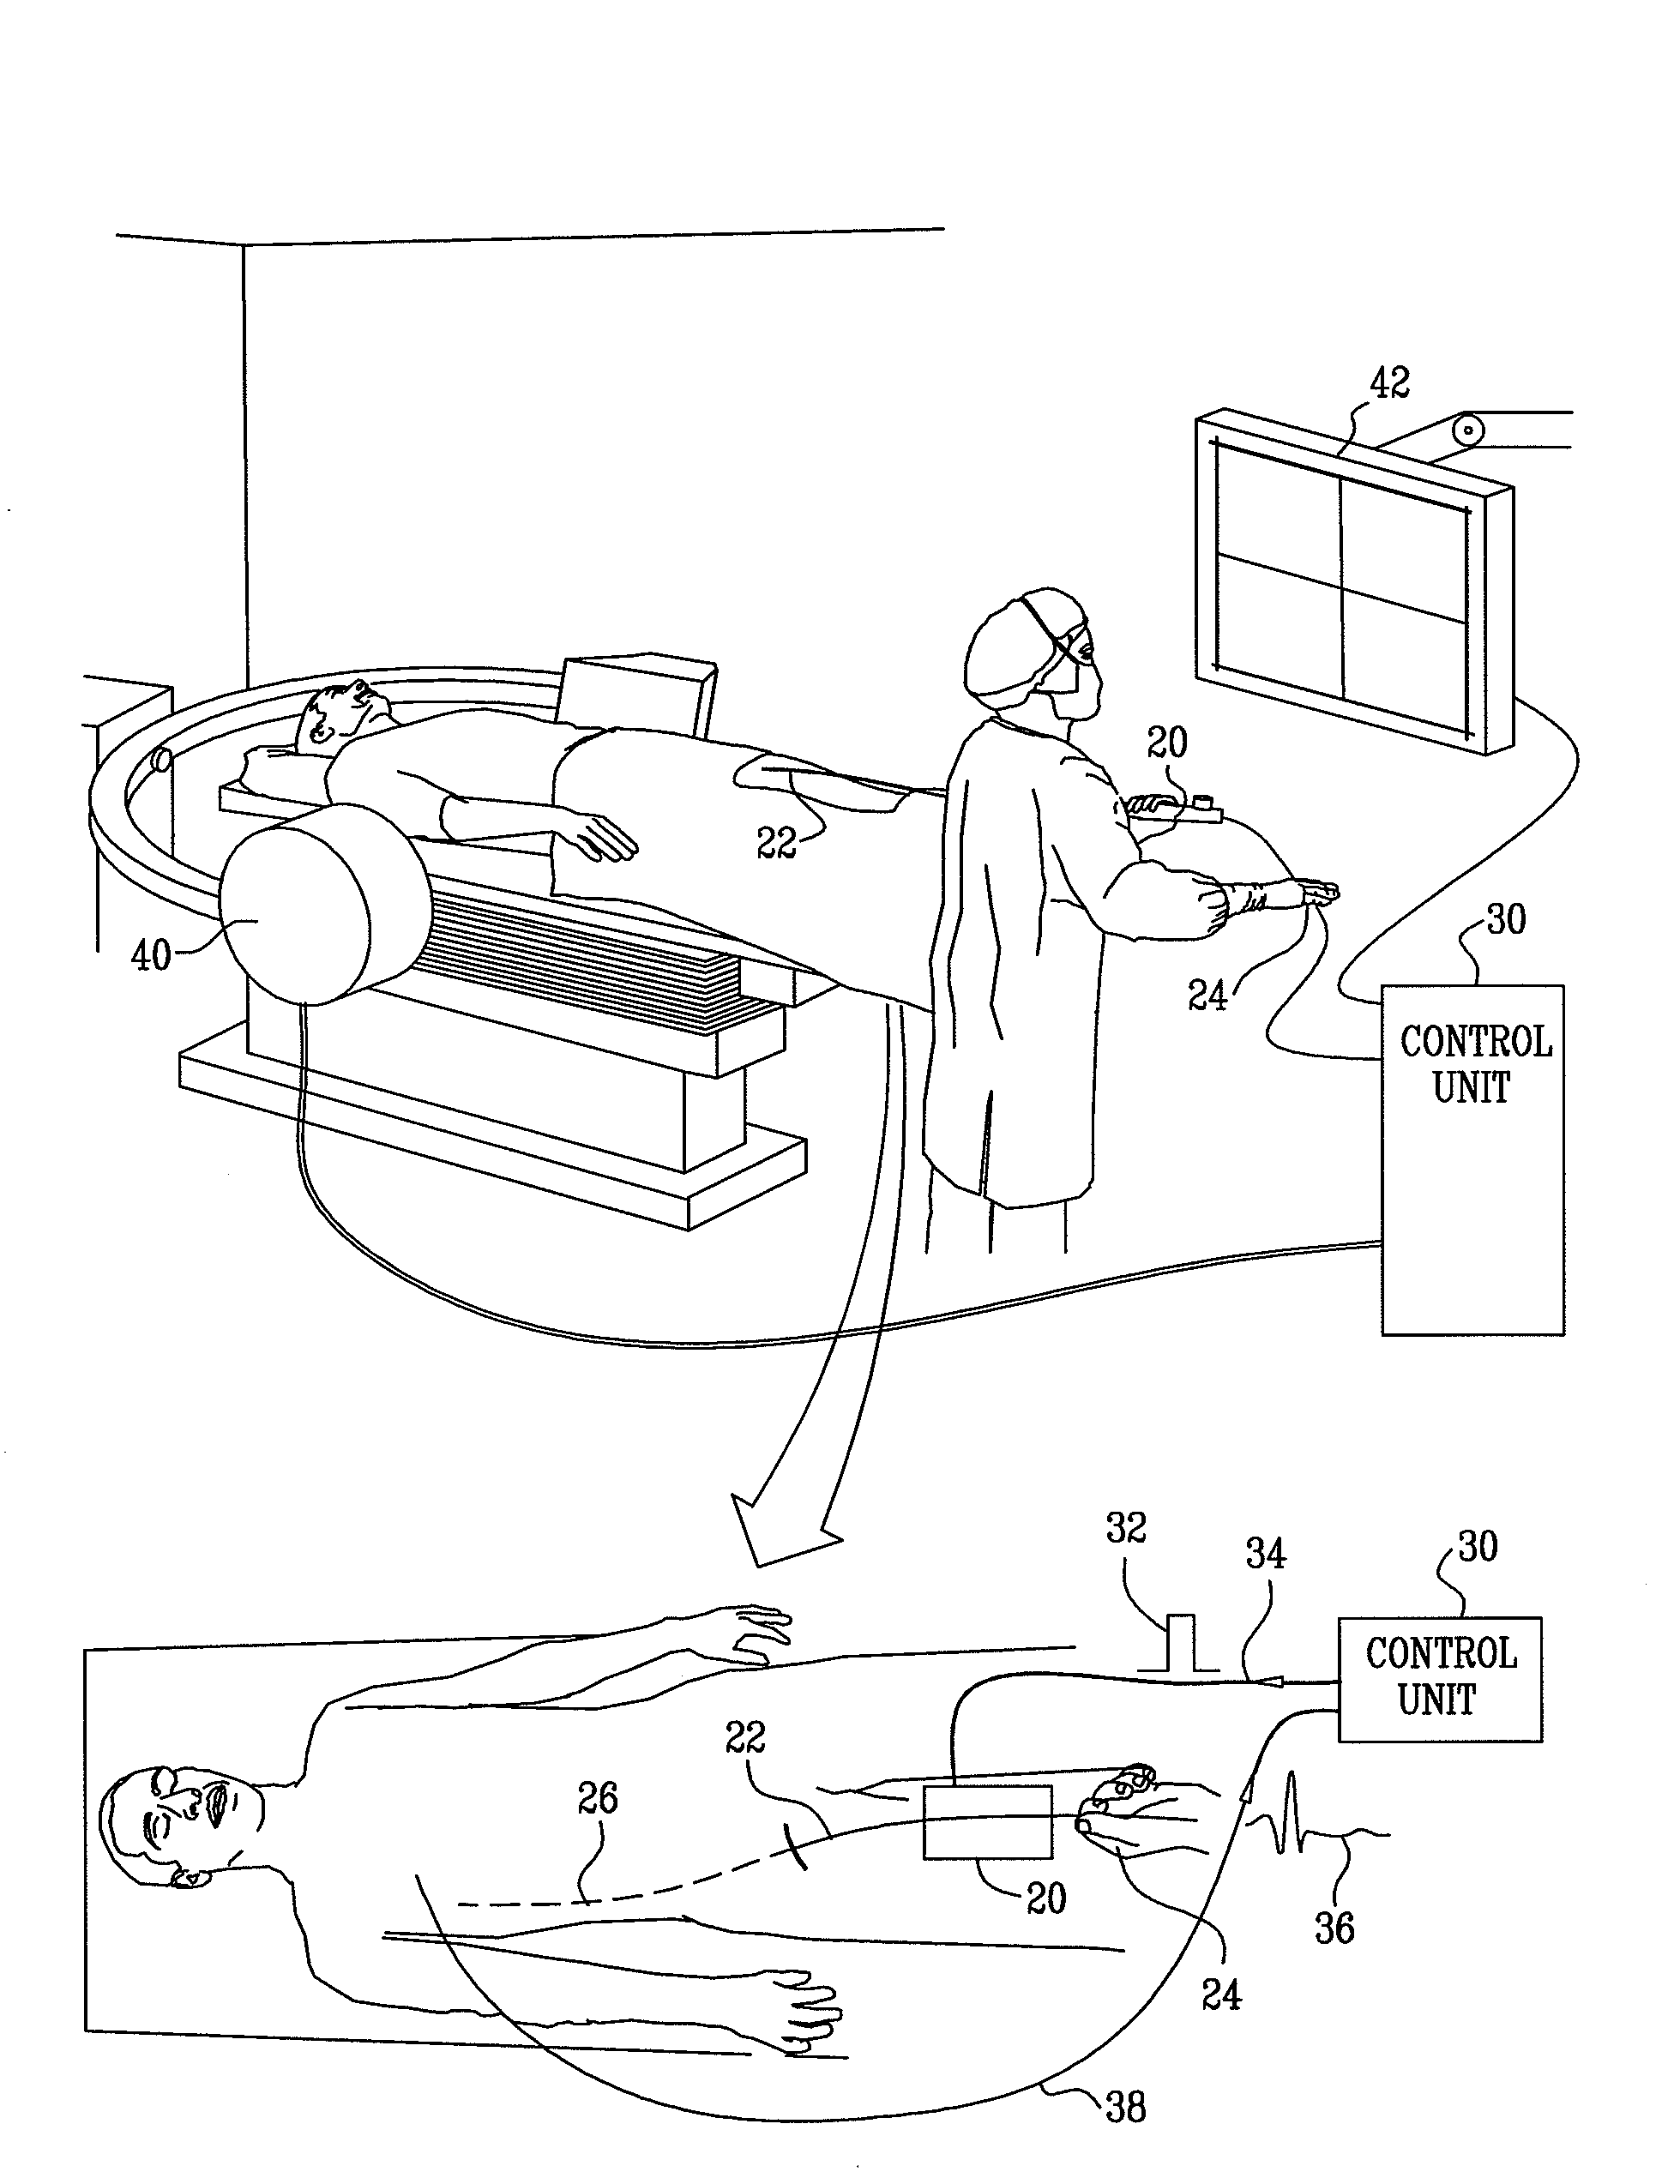 Stepwise advancement of a medical tool